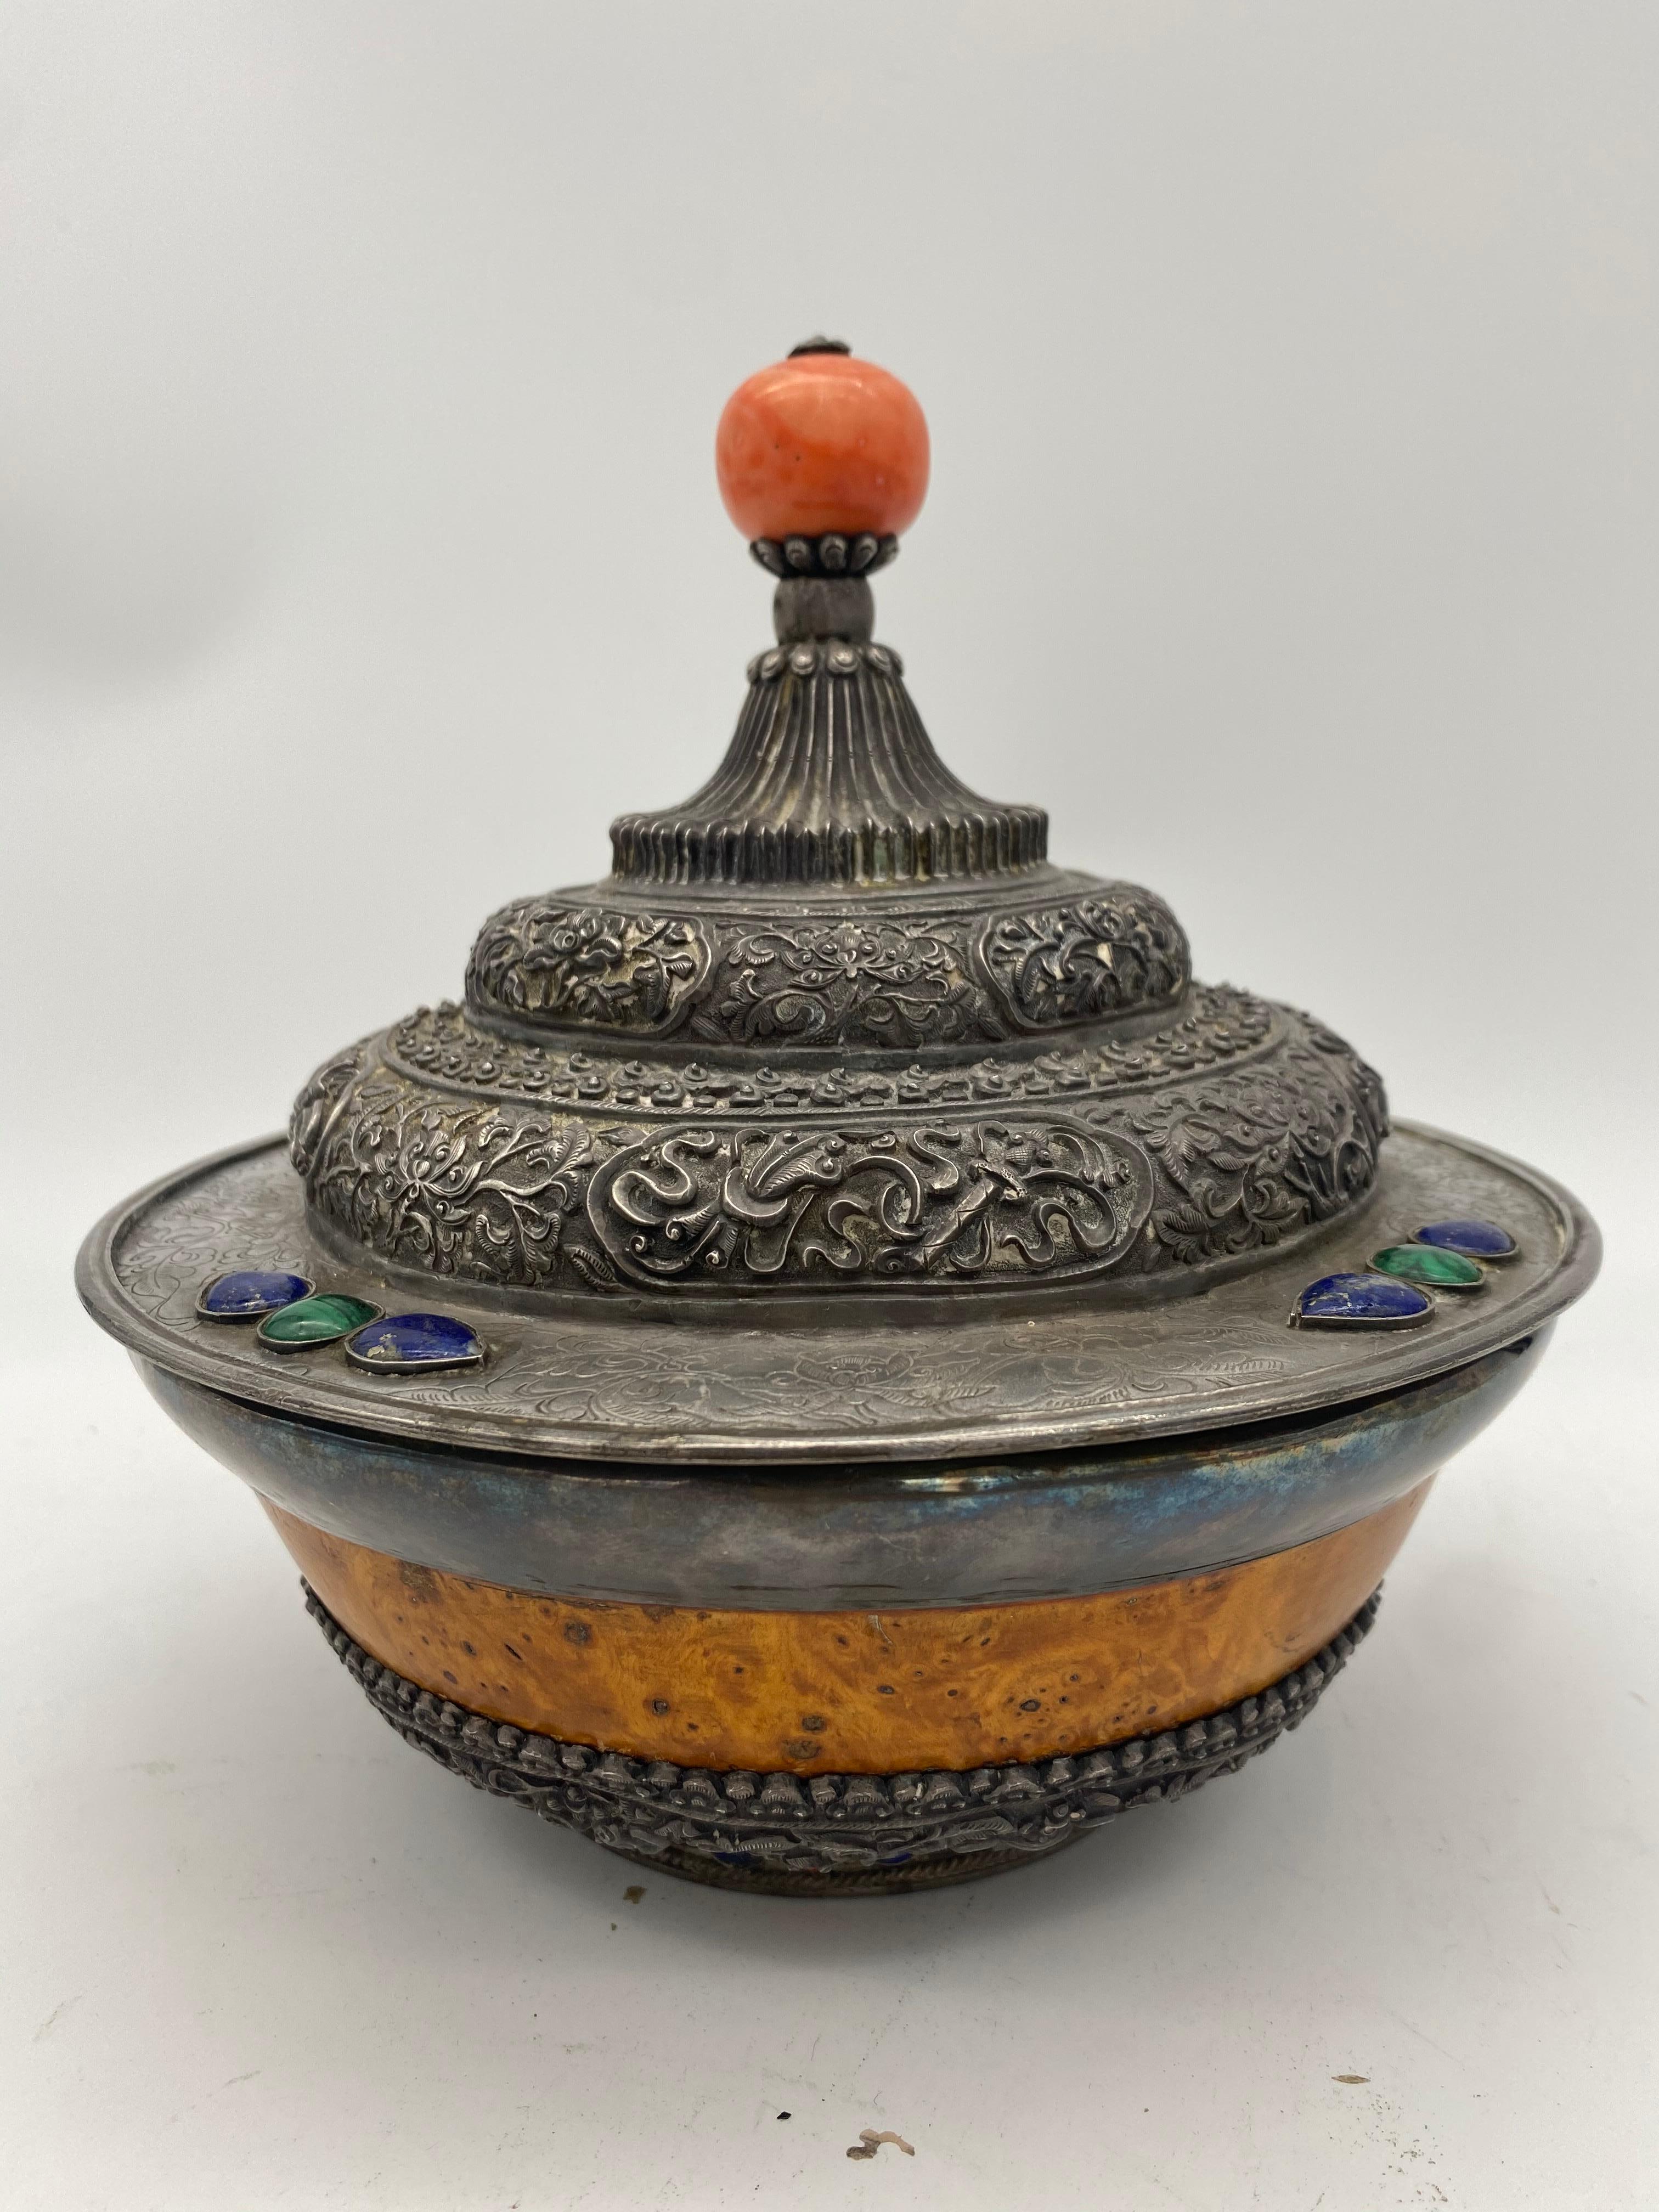 17th century rare Tibetan silver mounted brul covered bowl with coral bottom, the repousse and domed cover inset with Cora and lapis, big 3cm diameter red coral bottom, some tarnish, lacking in lapis jewel, measures: diameter 7.75 inch x 8 inch